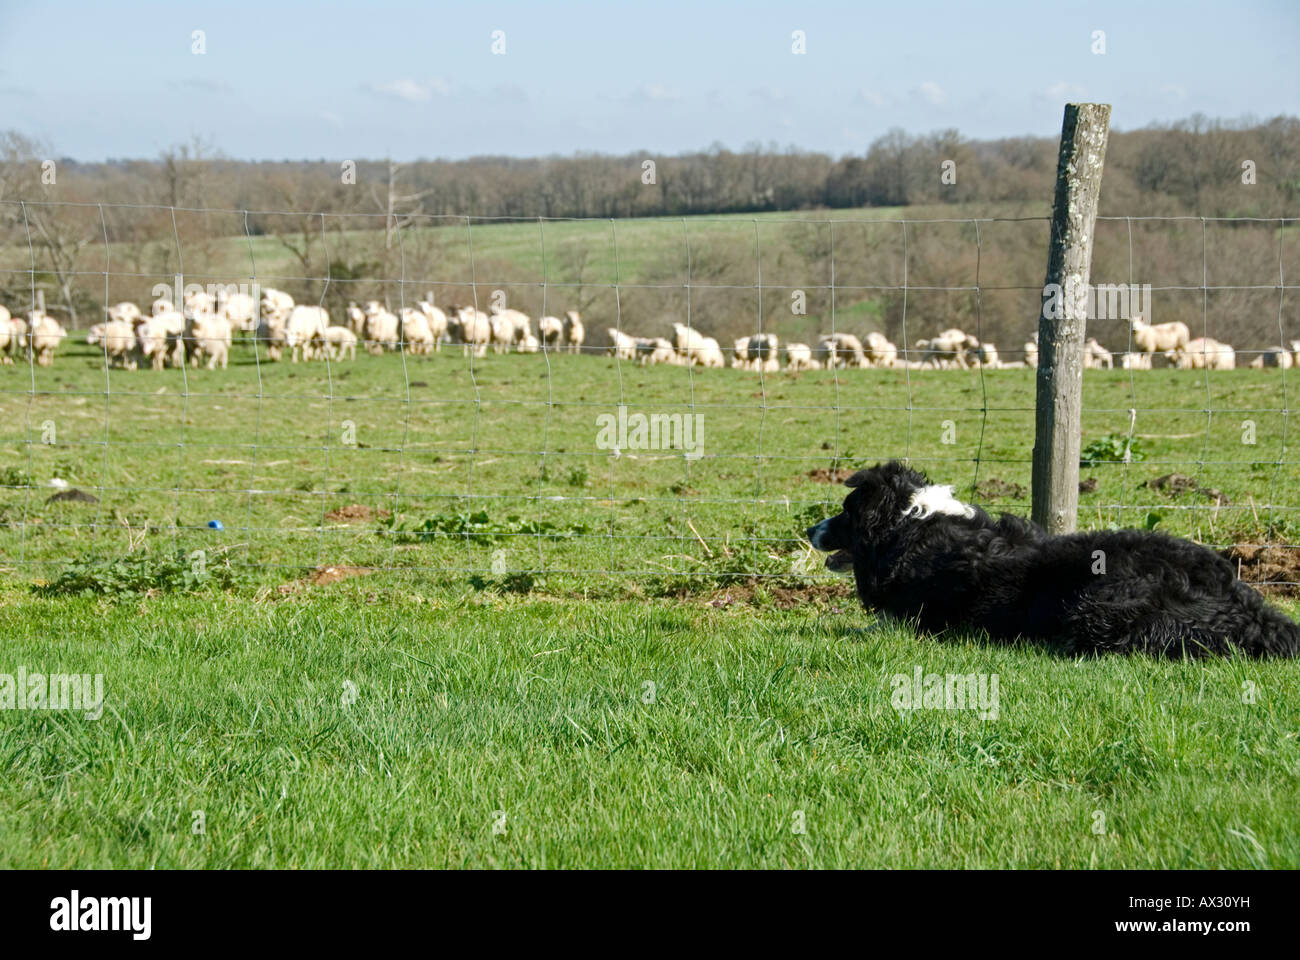 Stock photo of a black and white border collie dog watching a flock of sheep The photo was taken in the Limousin region of Fran Stock Photo